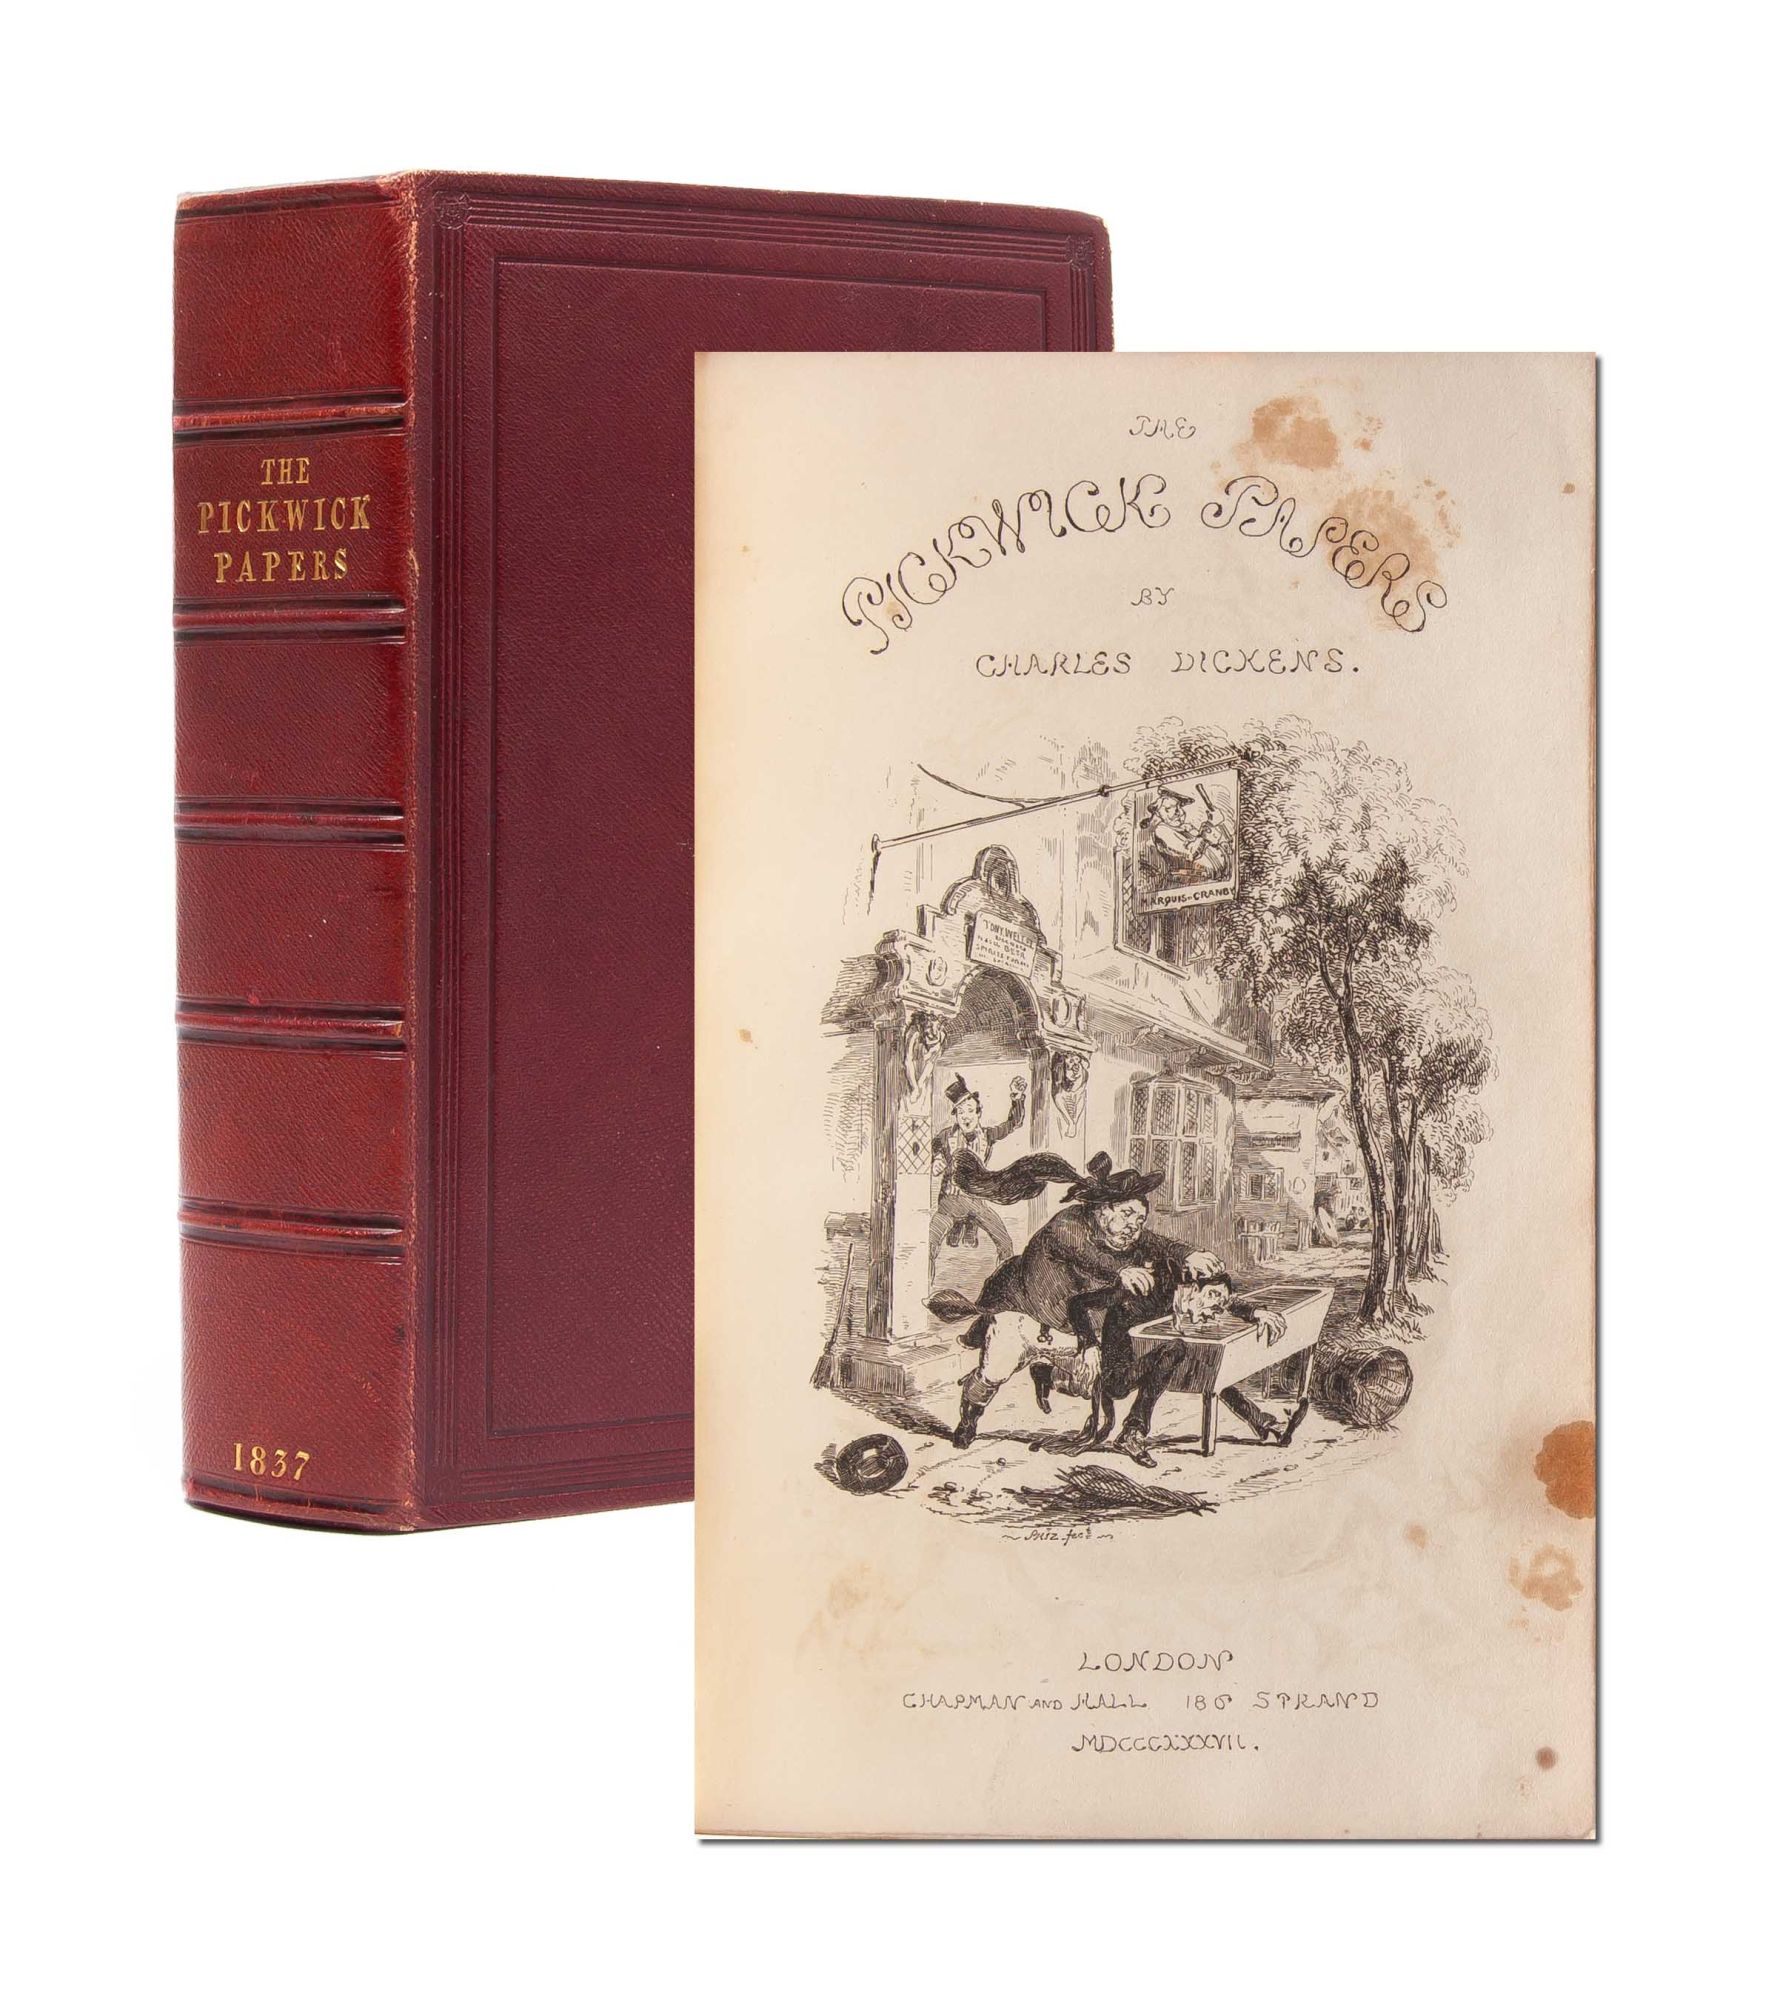 (Item #5371) The Posthumous Papers of the Pickwick Club. Charles Dickens.